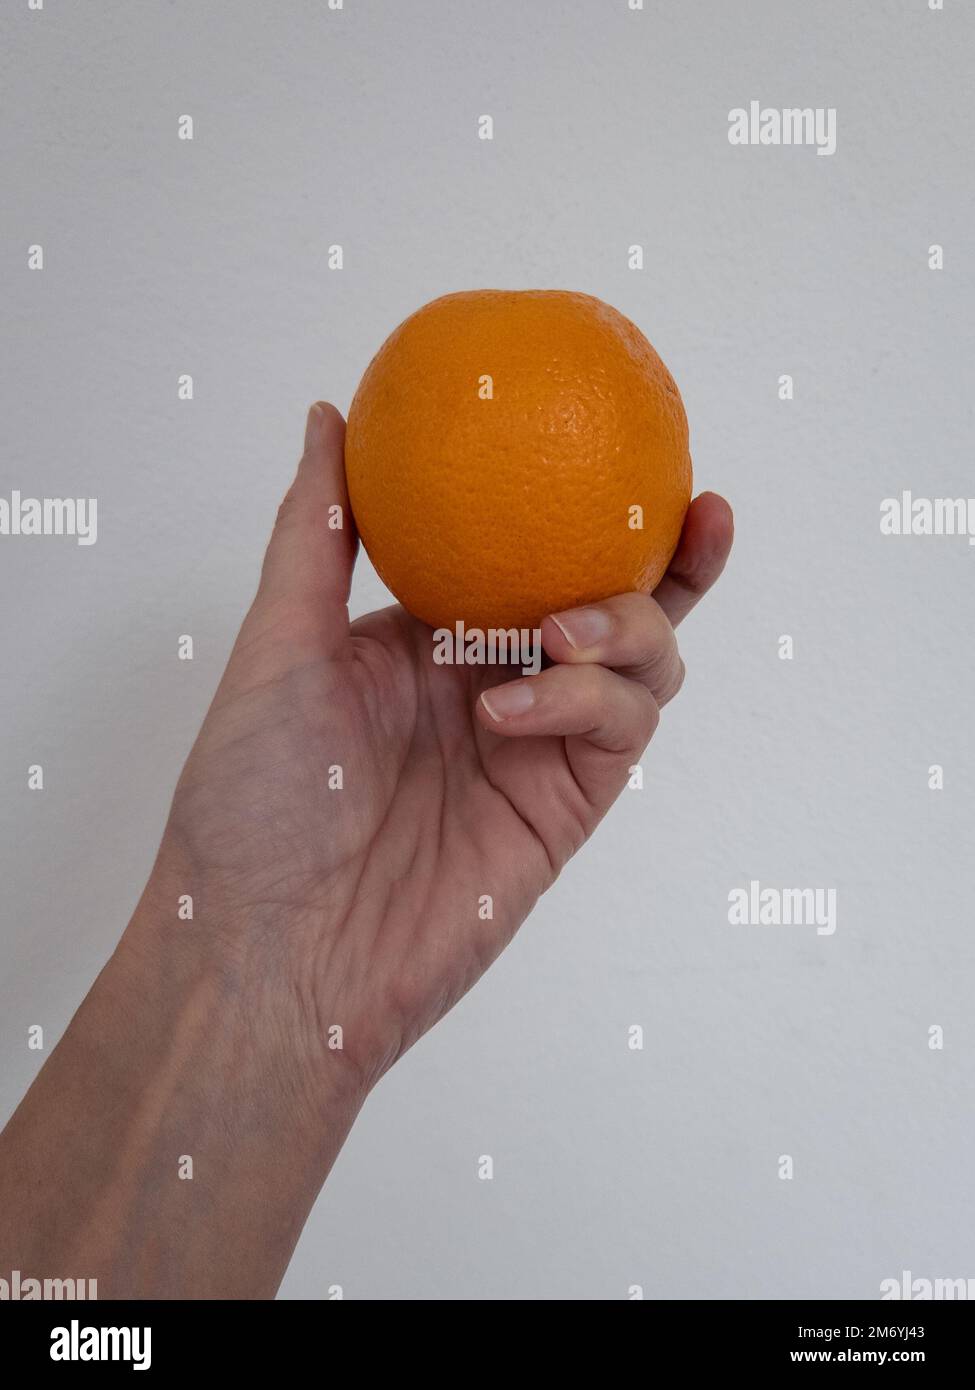 A woman's hand holding a ripe orange against a white background. Ready-to-eat fruit Stock Photo